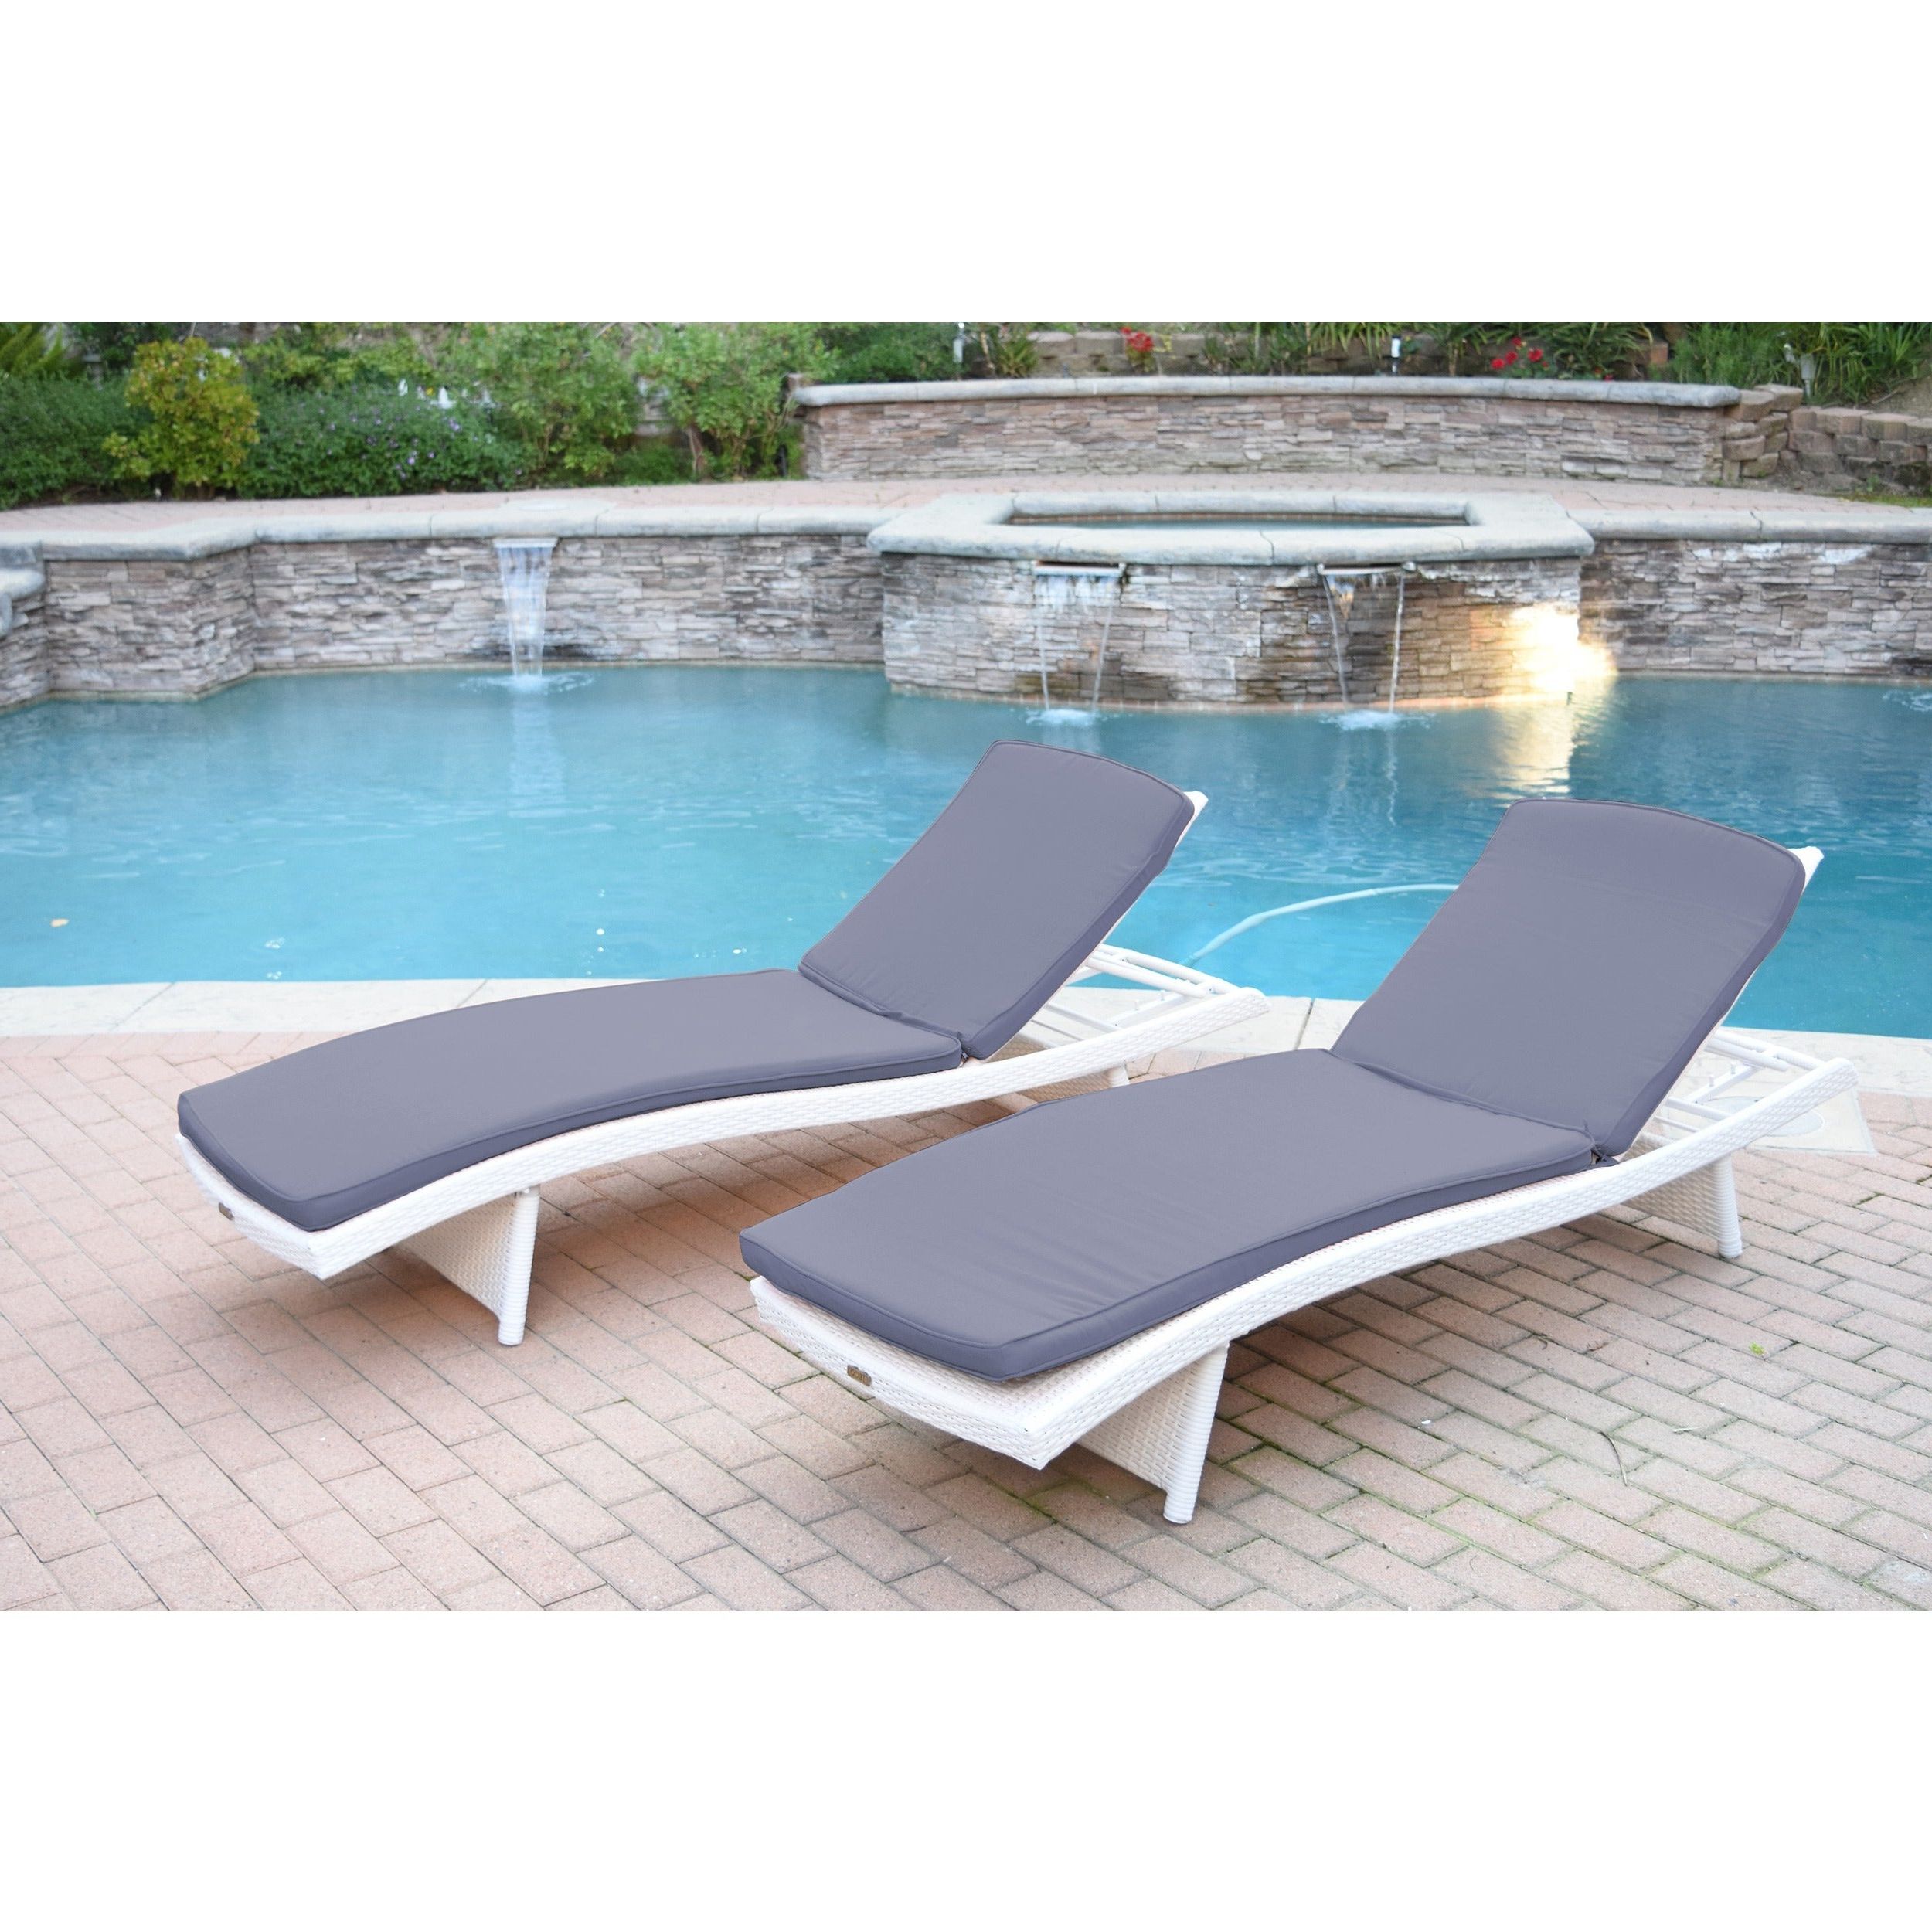 Wicker Adjustable Chaise Loungers With Cushion Regarding Most Current White Wicker Adjustable Chaise Lounger With Cushions (set Of 2) (View 15 of 25)